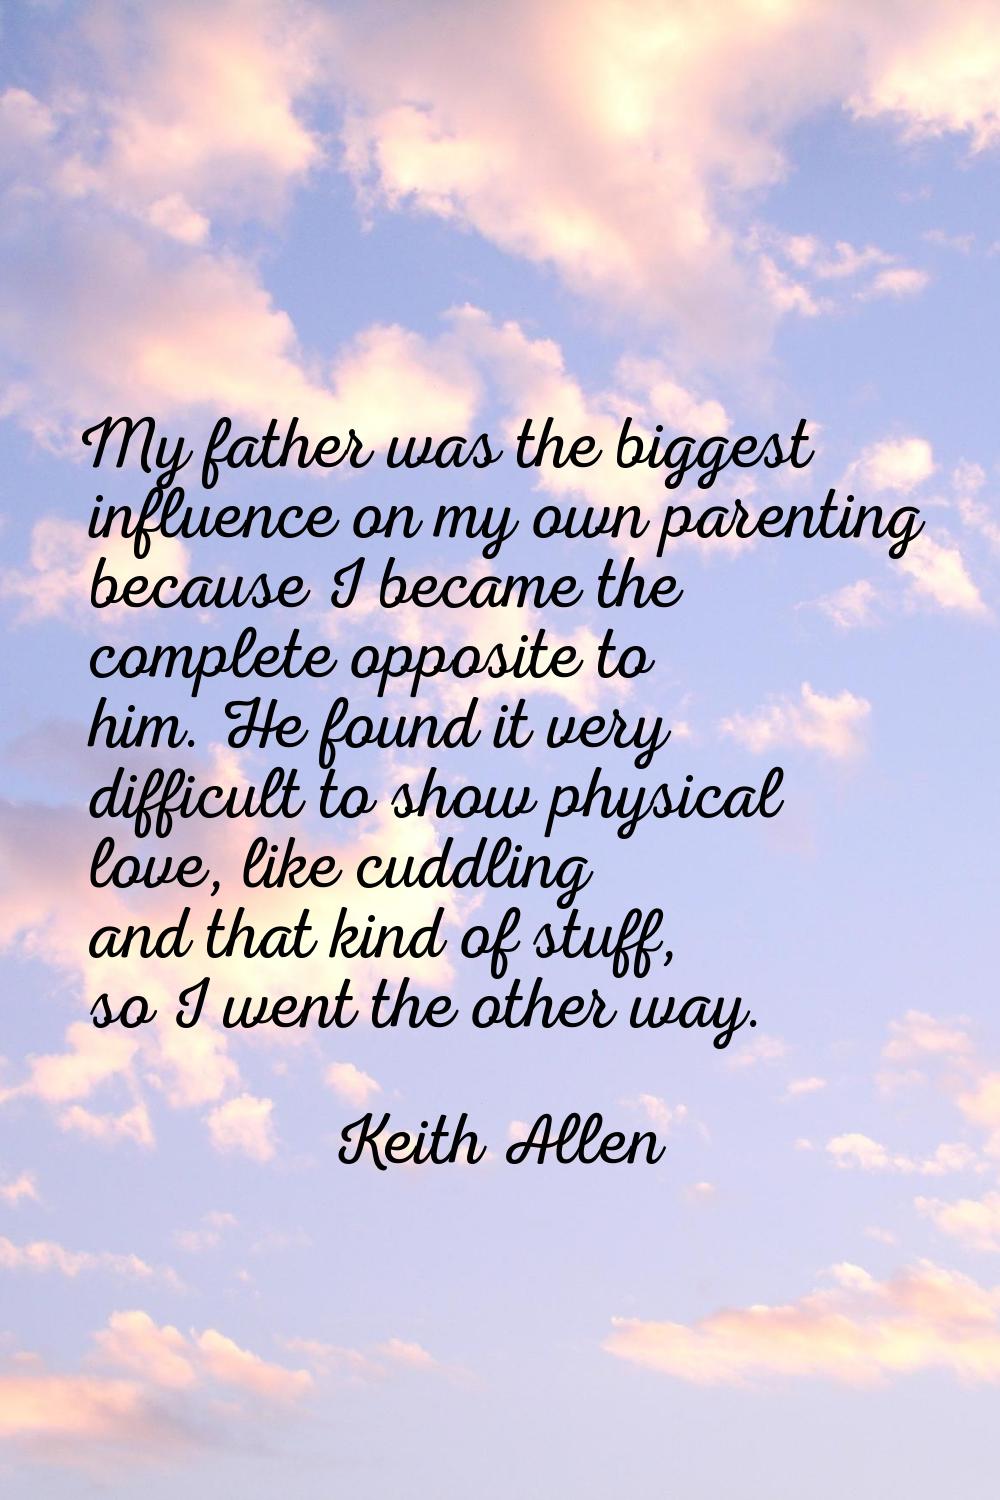 My father was the biggest influence on my own parenting because I became the complete opposite to h